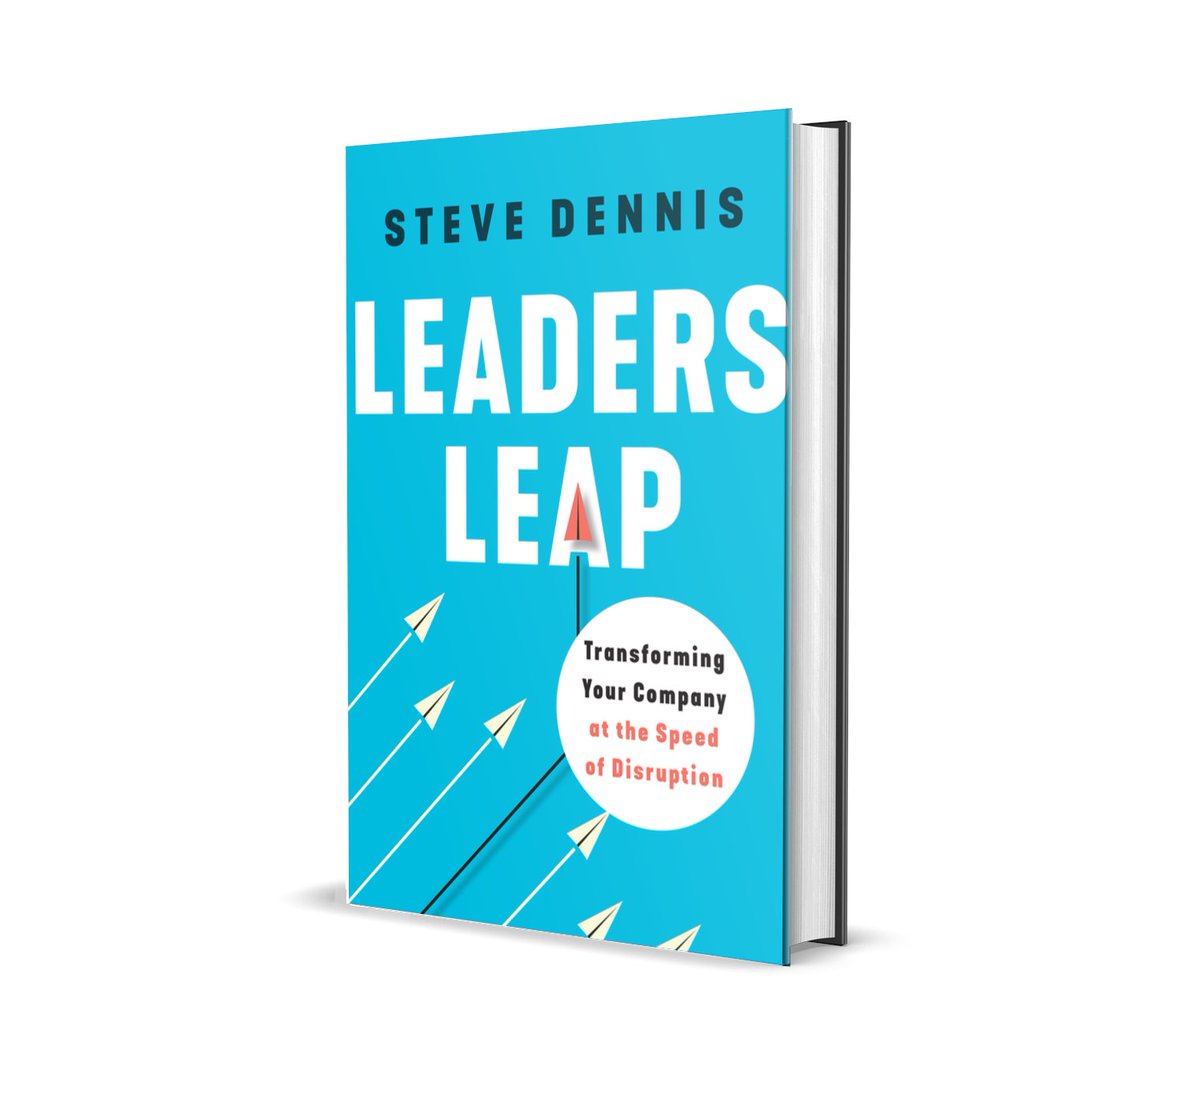 DFW friends: Don't miss my book launch event at @SMUCox on April 24. We'll start with an hour of networking with #retail leaders, followed by a fireside chat about 'Leaders Leap,' ending with a book signing. It's FREE but you MUST pre-register at dfwrea.org/events/#!event…